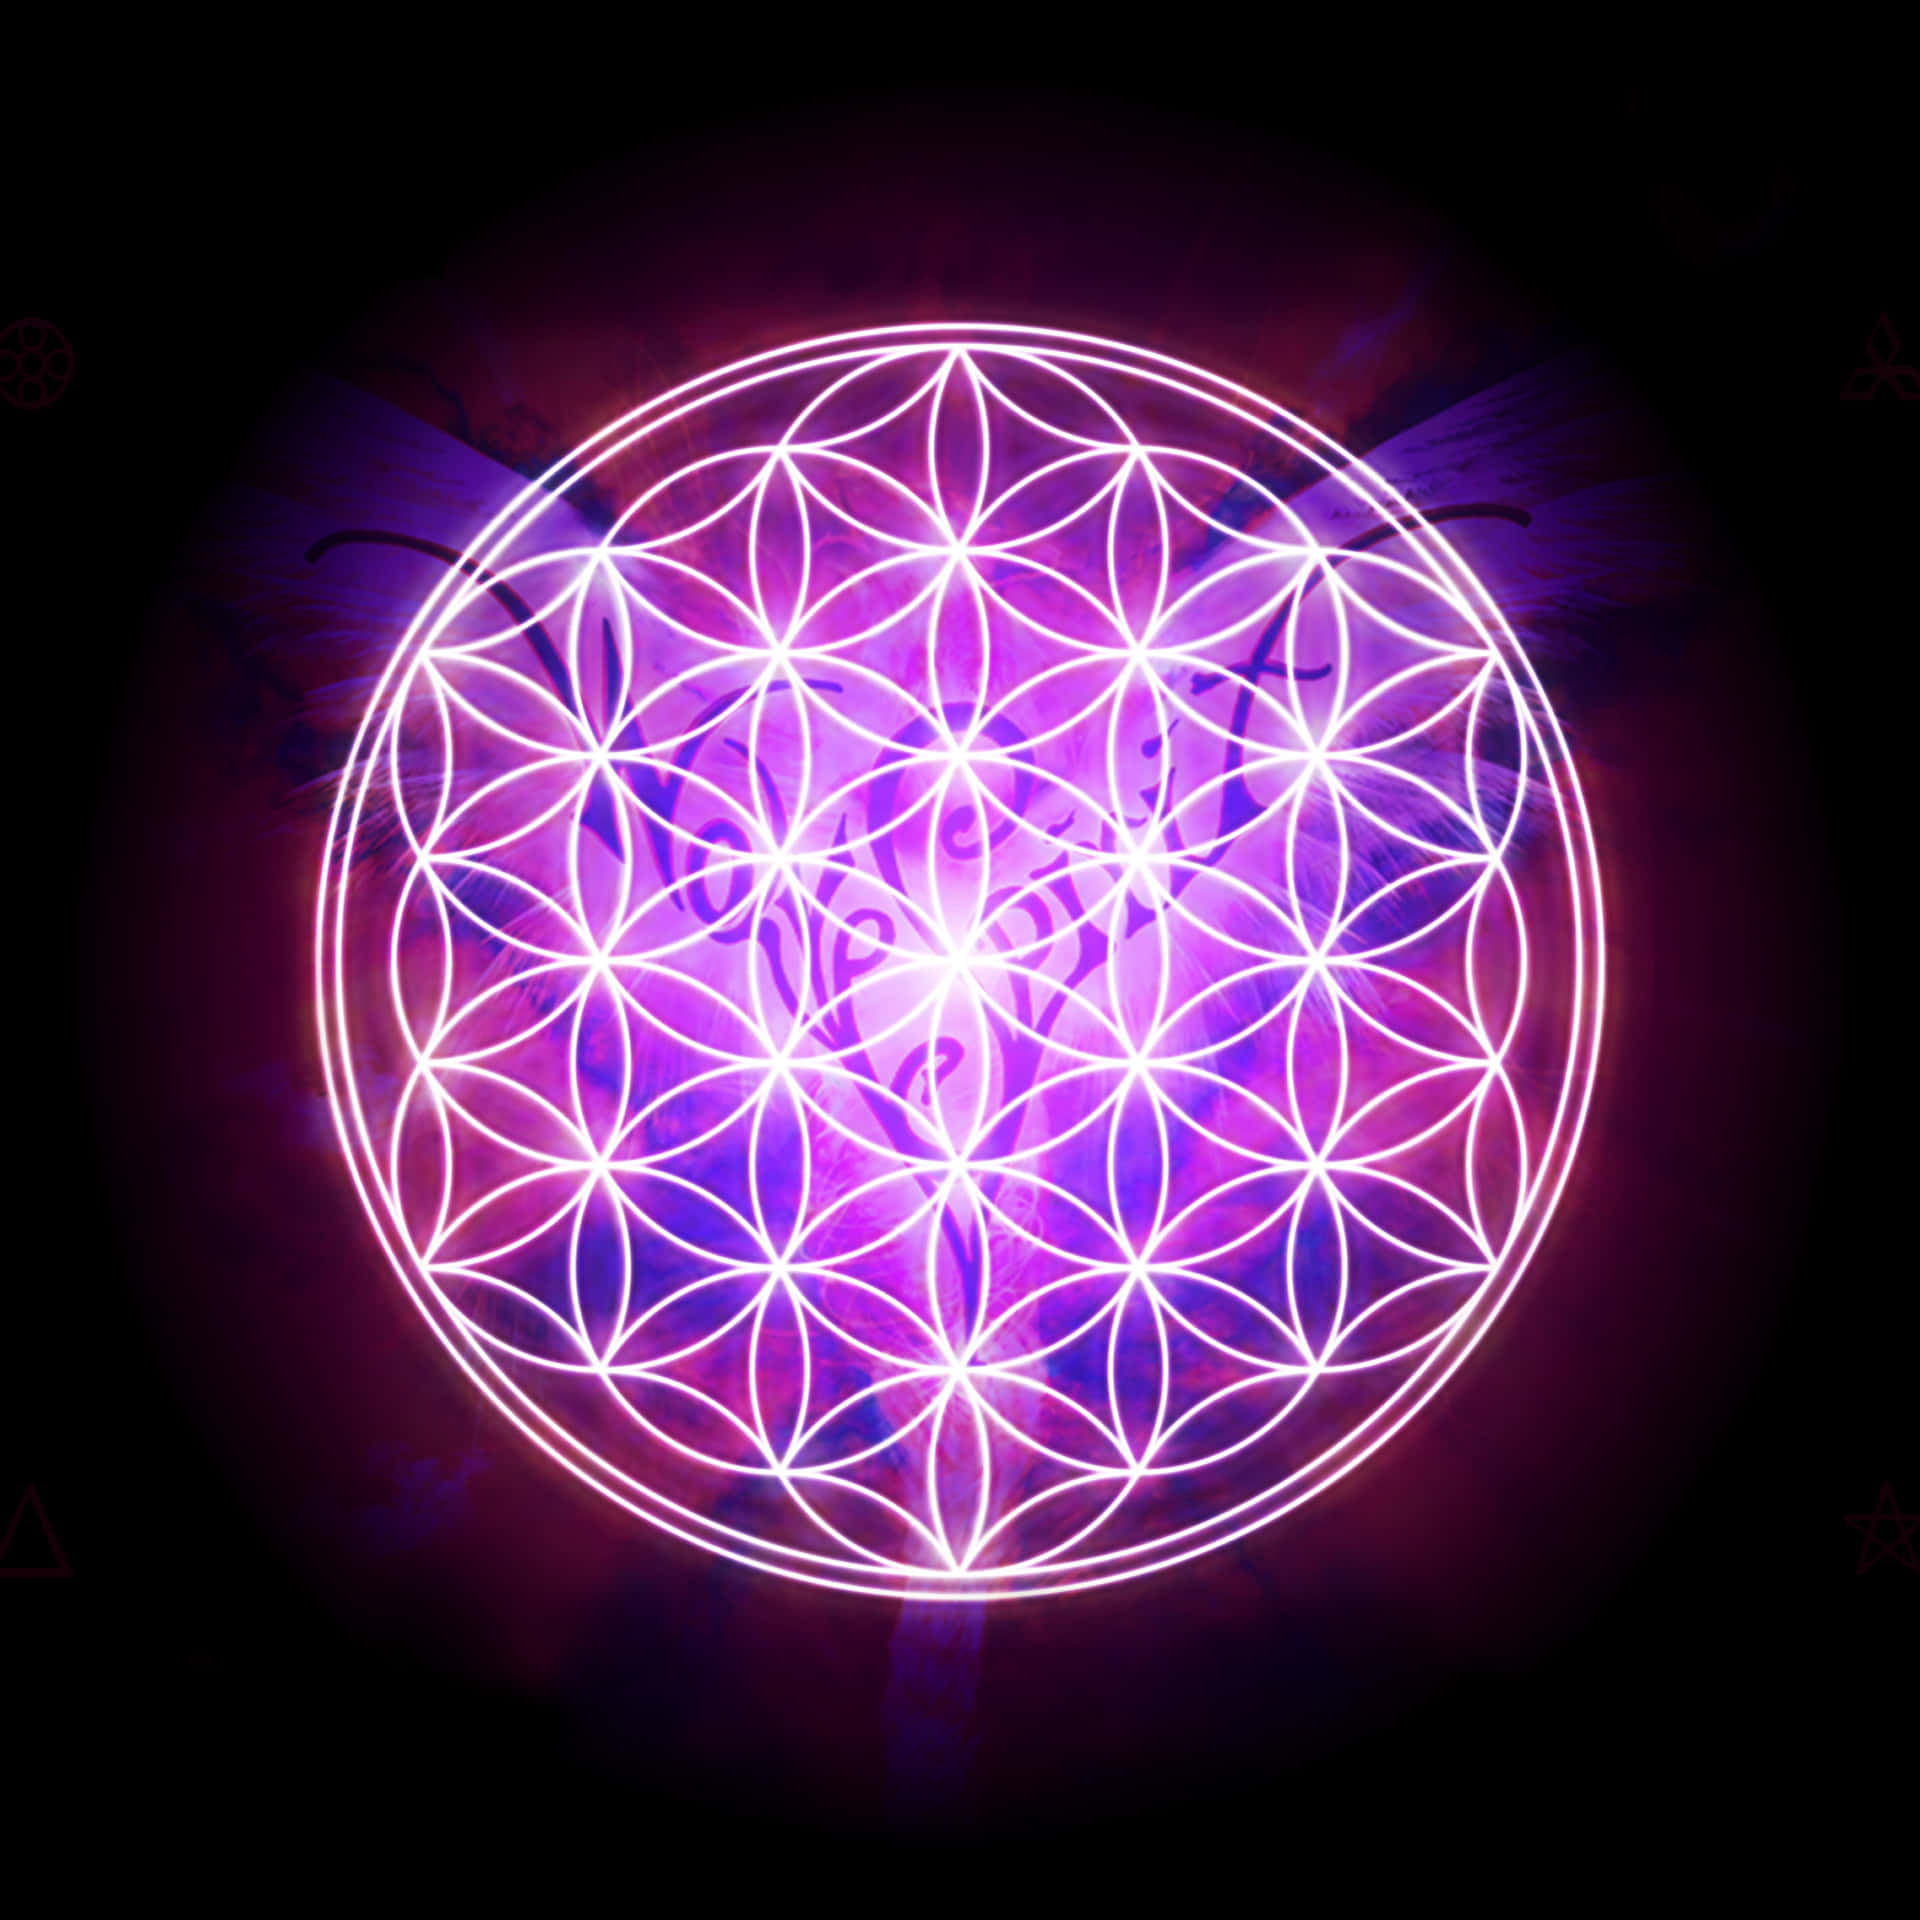 A Flower Of Life Symbol With A Purple Light Wallpaper